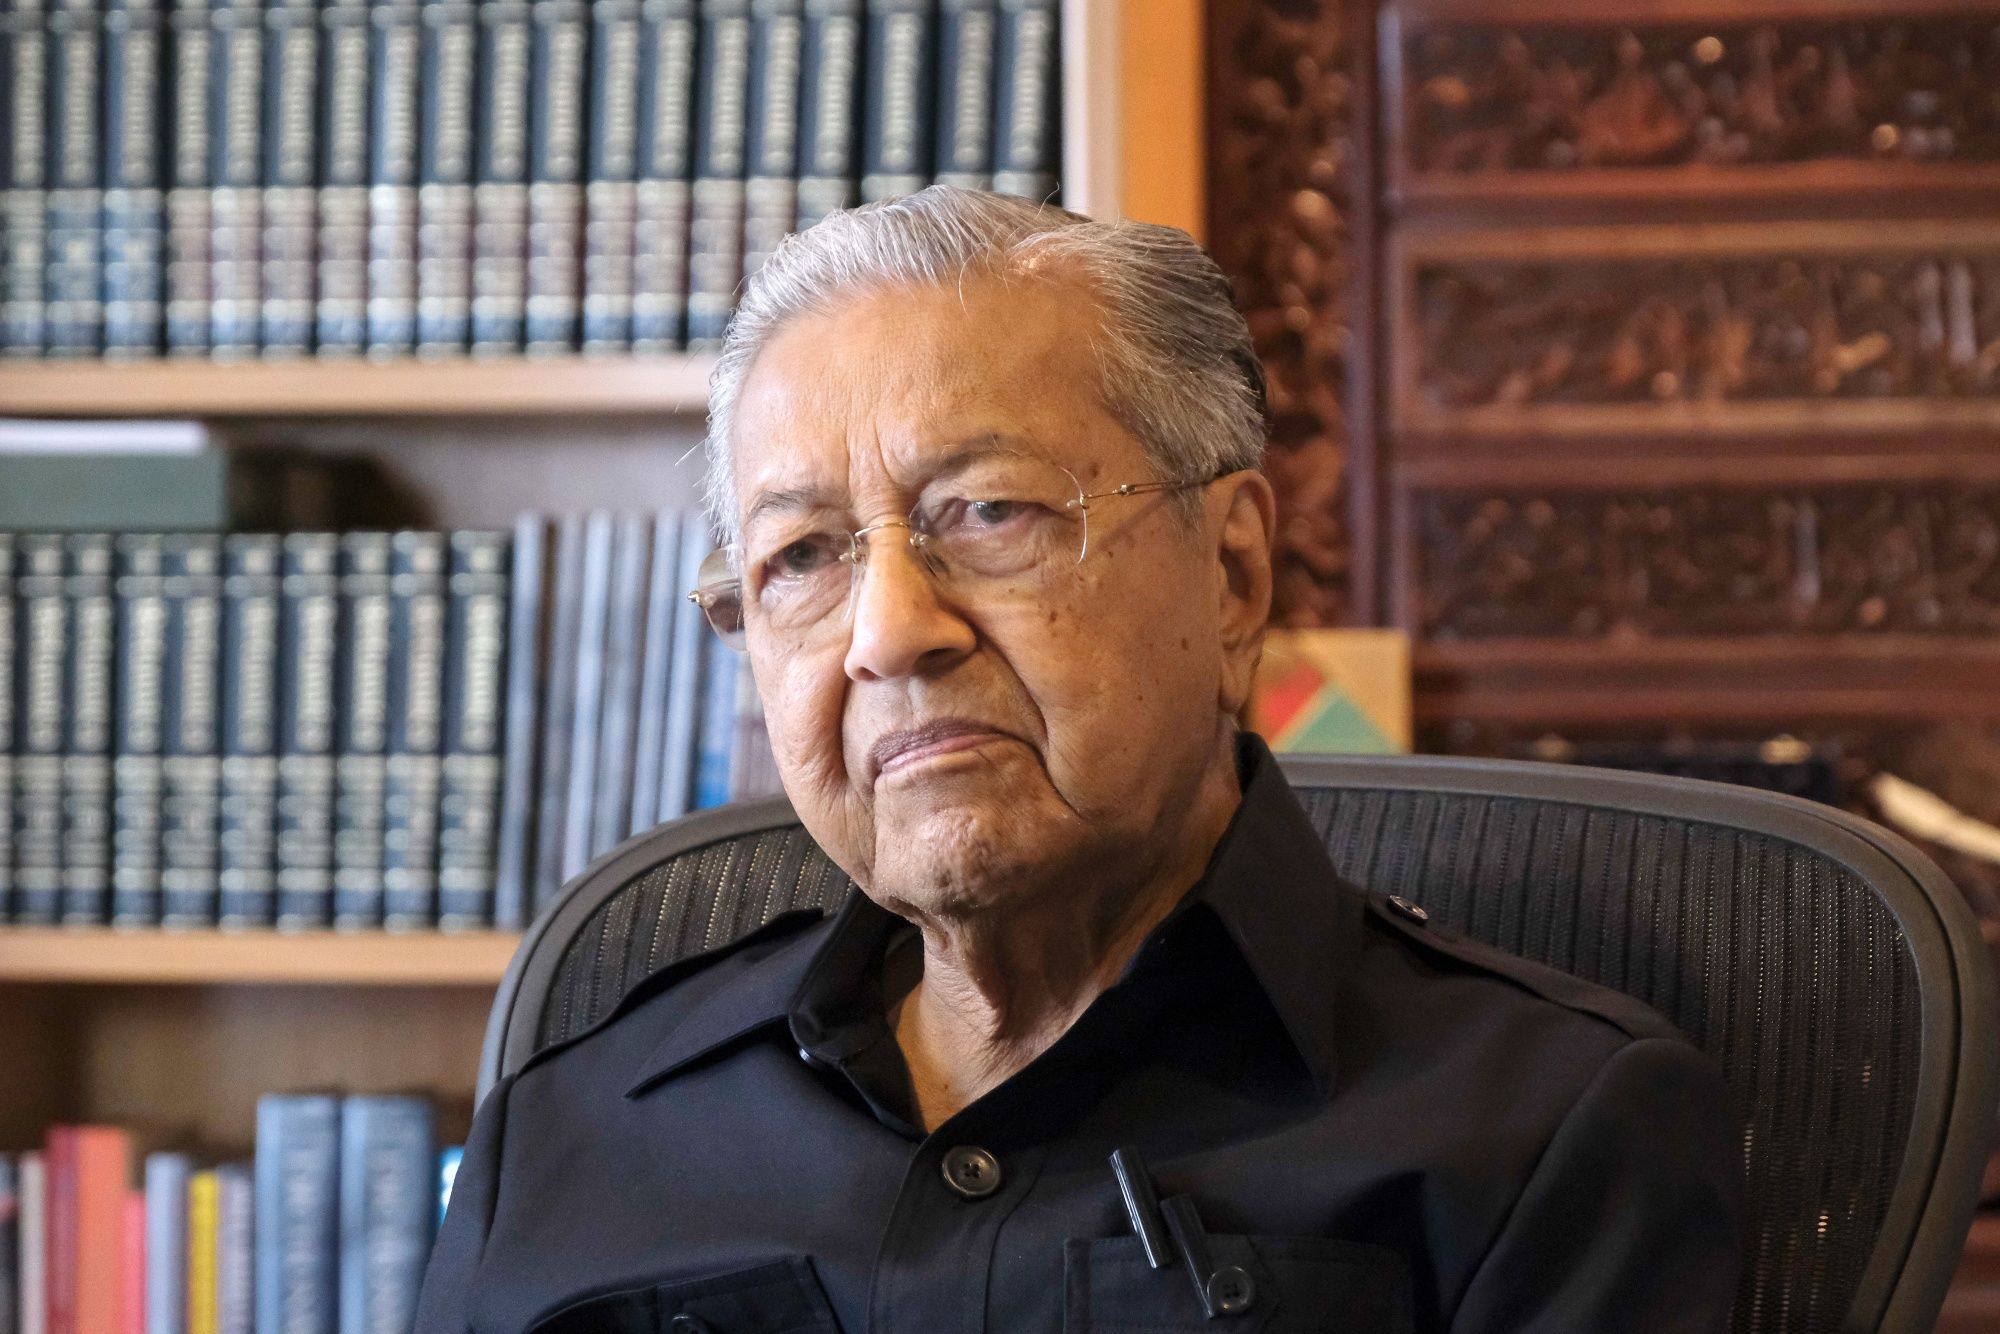 Mahathir Mohamad, Malaysia’s former prime minister, in August 2022. Photo: Bloomberg